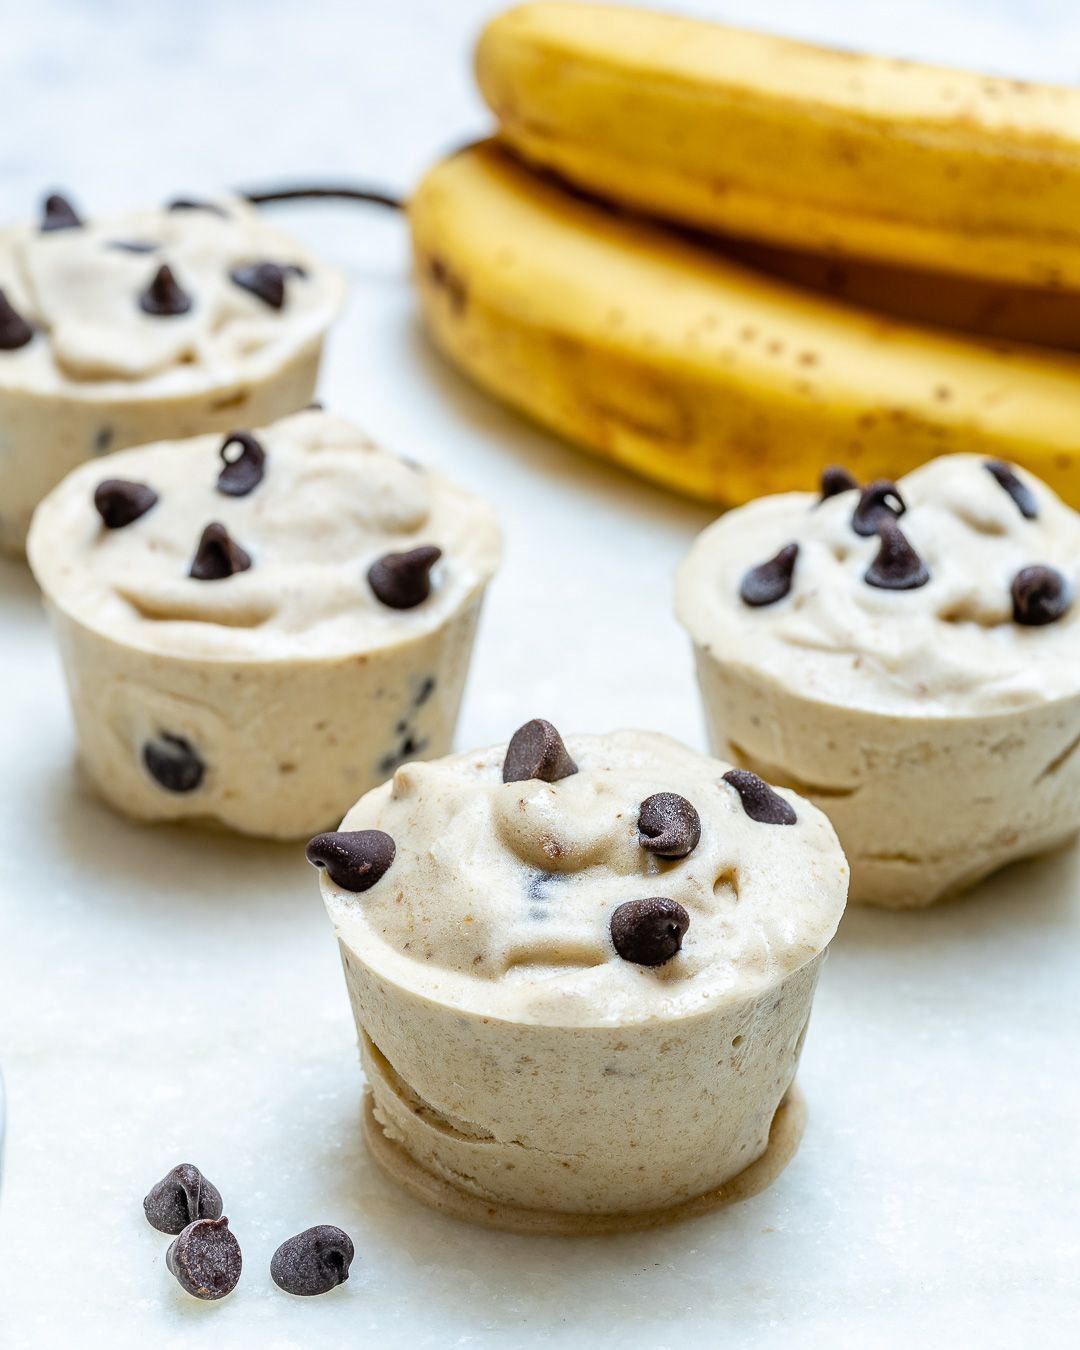 Healthy Chocolate Chip Banana “Ice Cream” Cups for Summertime Fun! -   11 healthy recipes Clean chocolate chips ideas